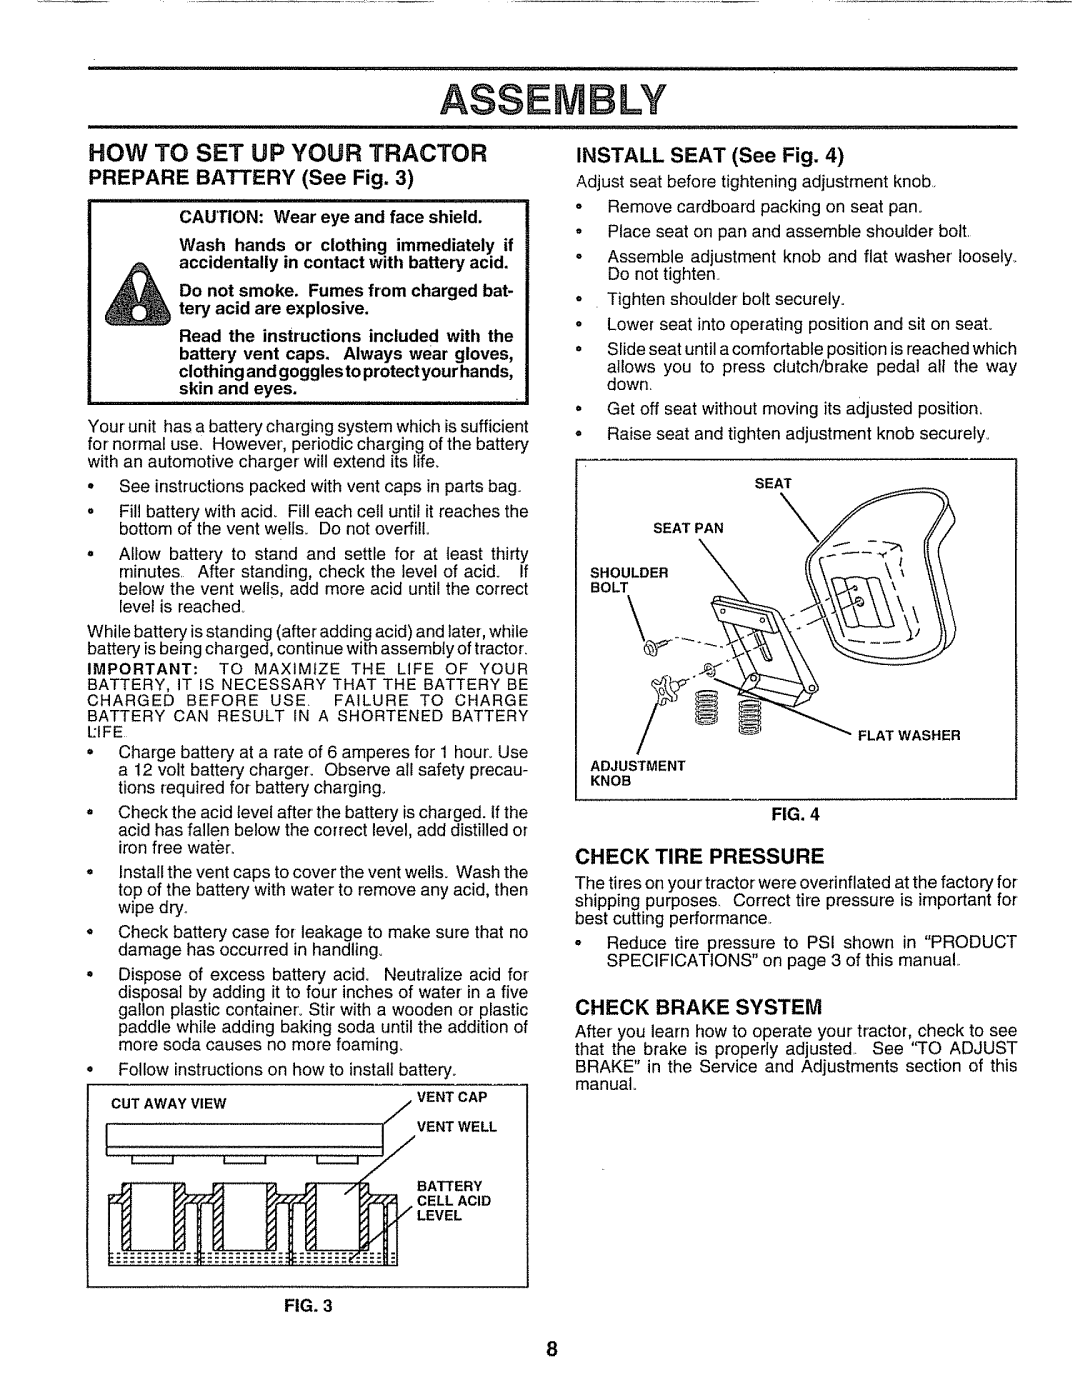 Sears 917.25597 Ass Ly, How To Set Up Your Tractor, PREPARE BATTERY See Fig, INSTALL SEAT See Fig, Check Tire Pressure 